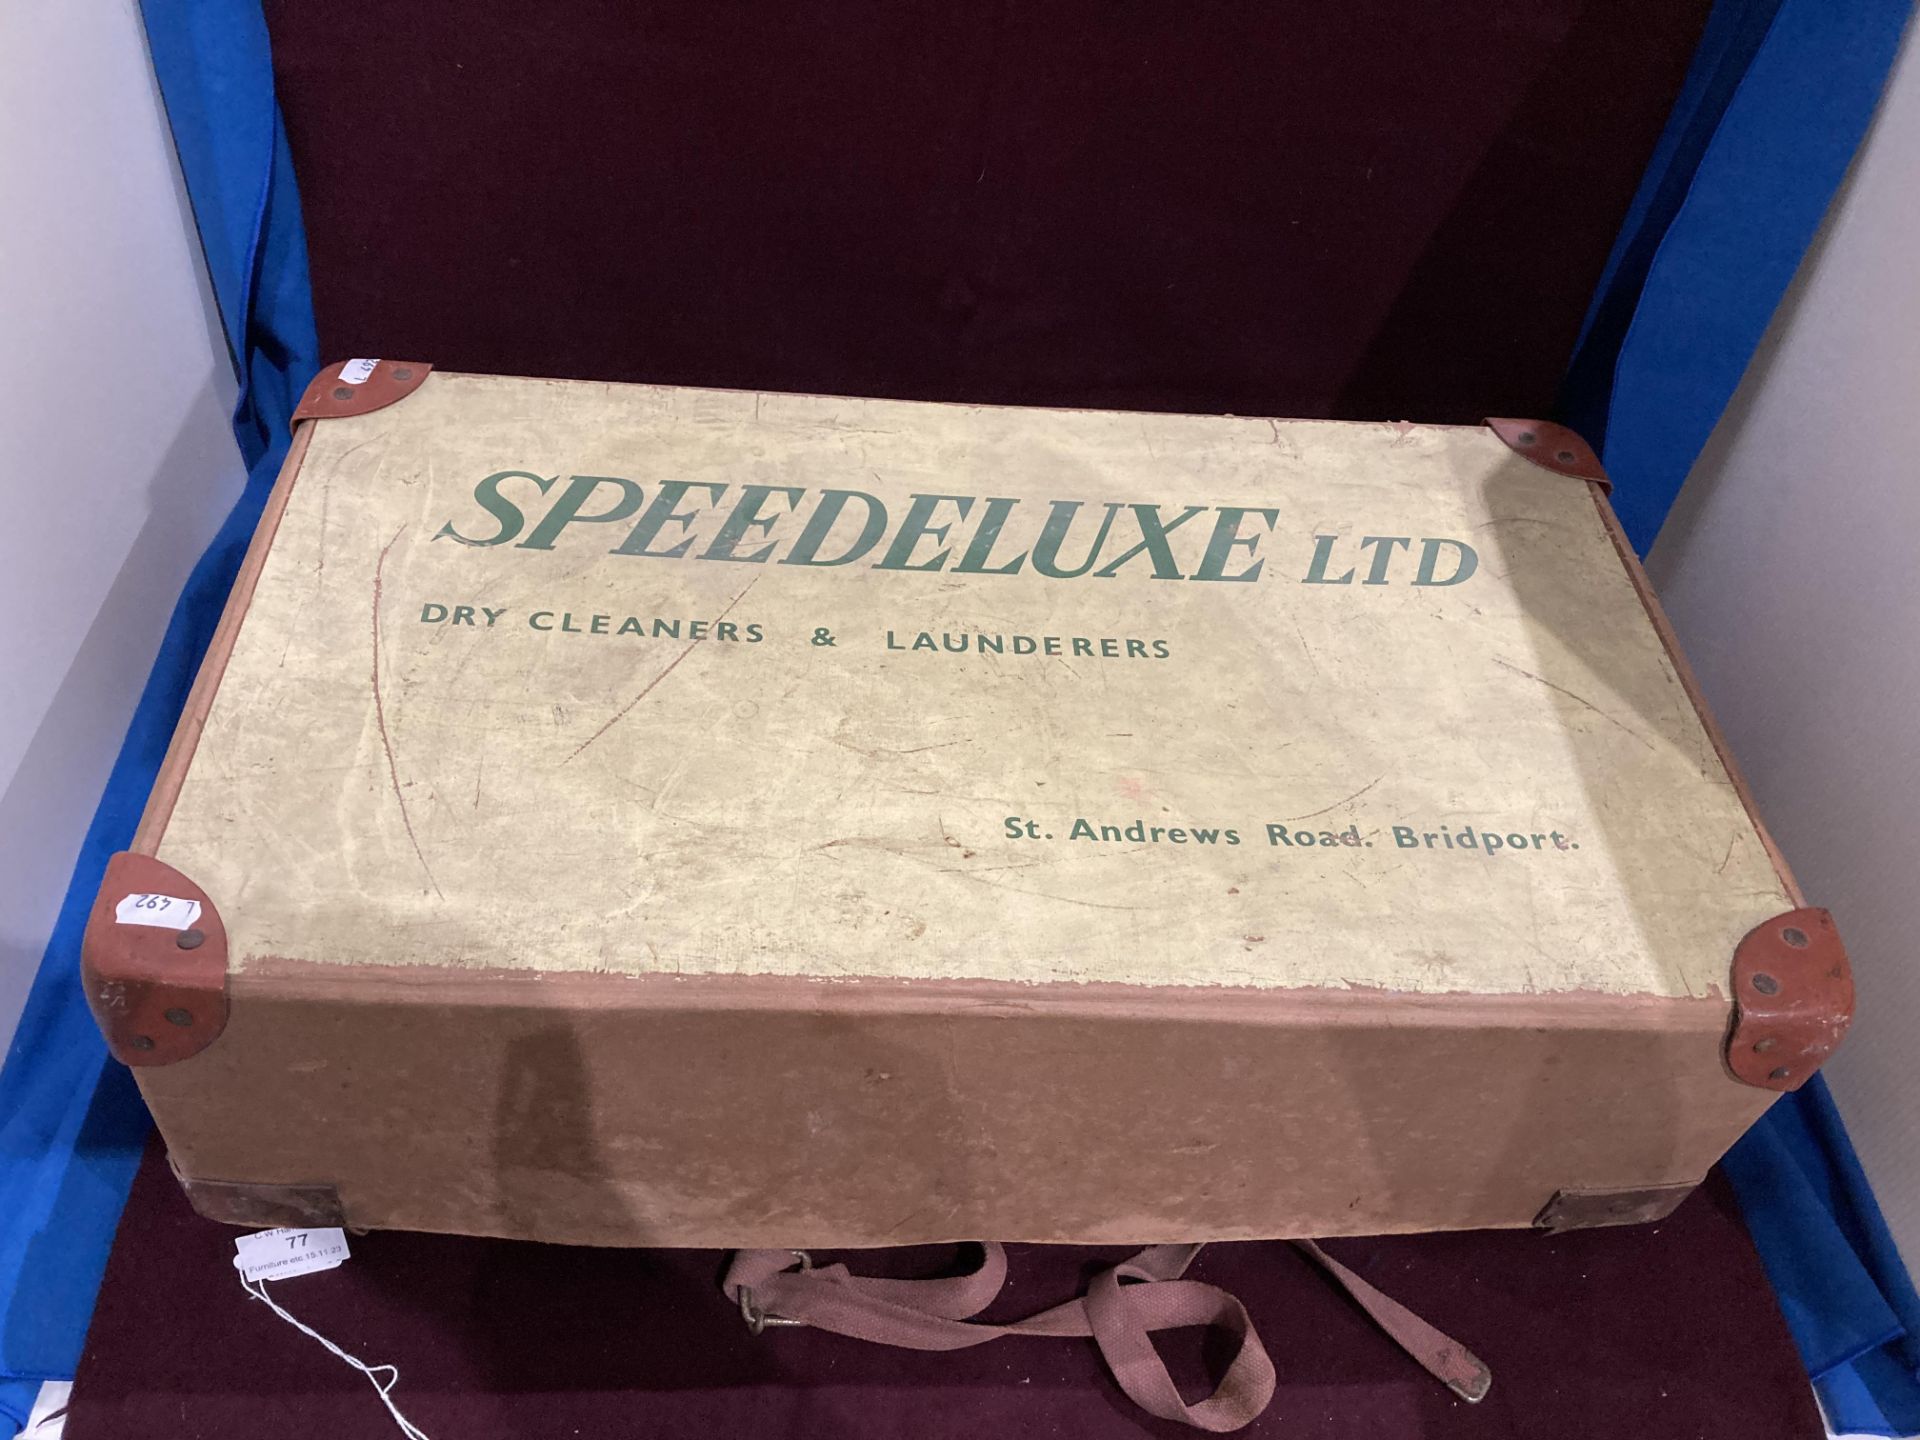 A Speed Luxe Ltd Dry Cleaners and Launderers, St.